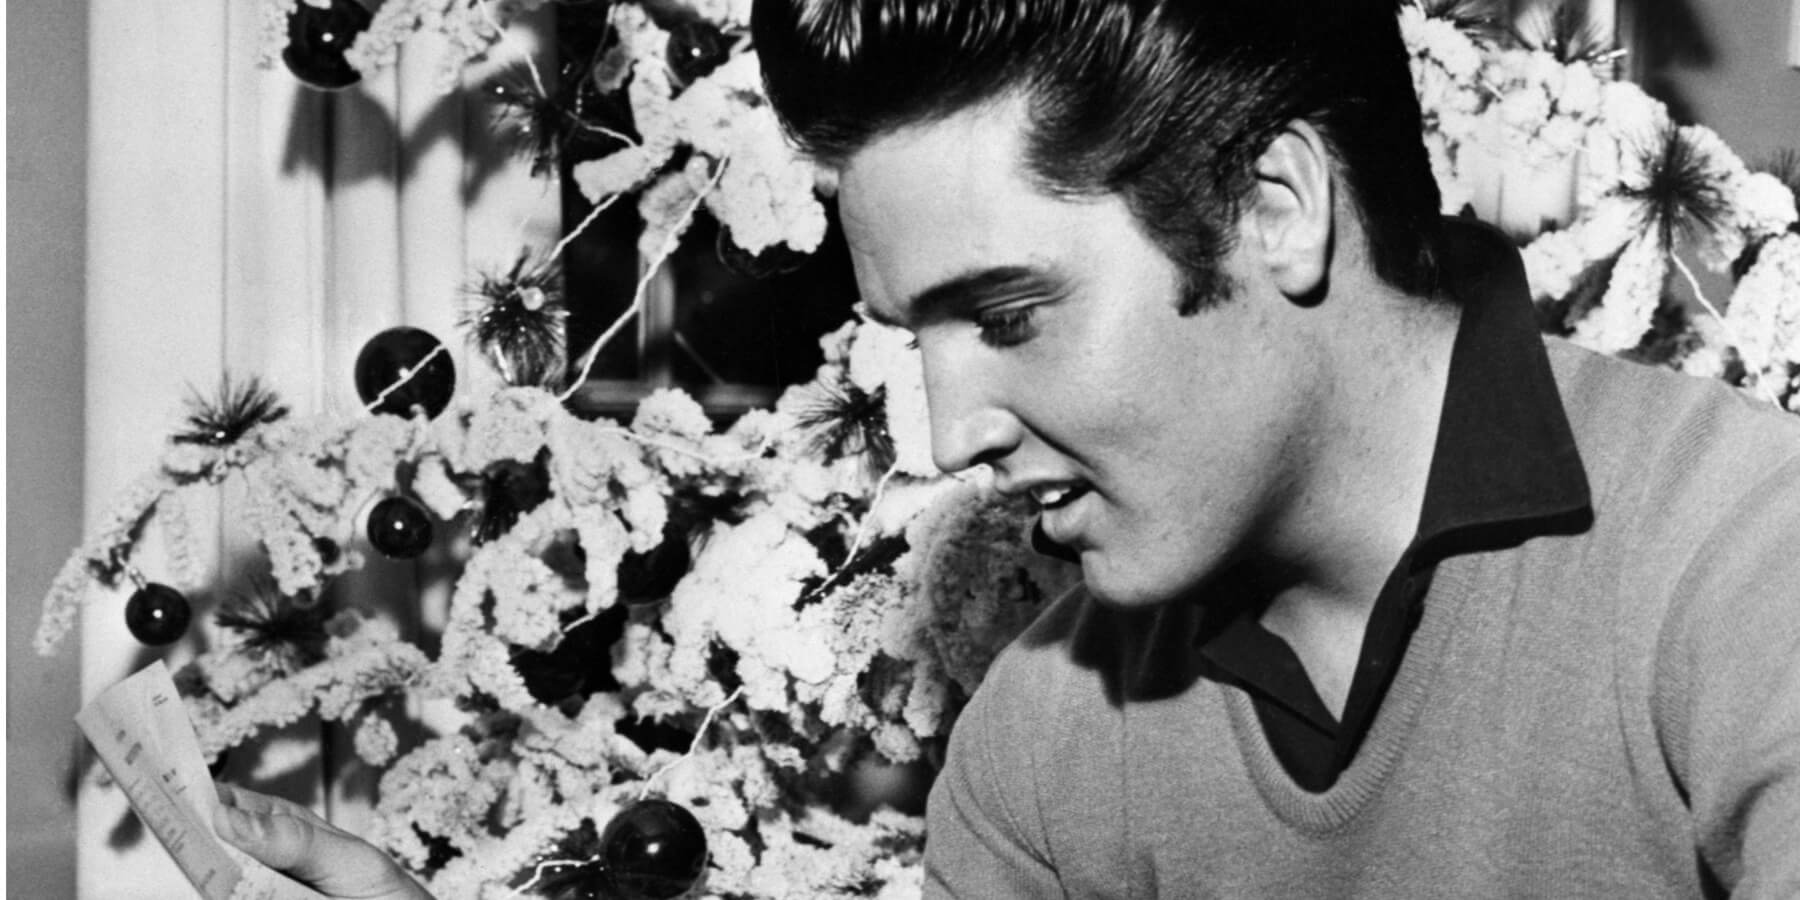 Elvis Presley photographed at home in Graceland during Christmas time.